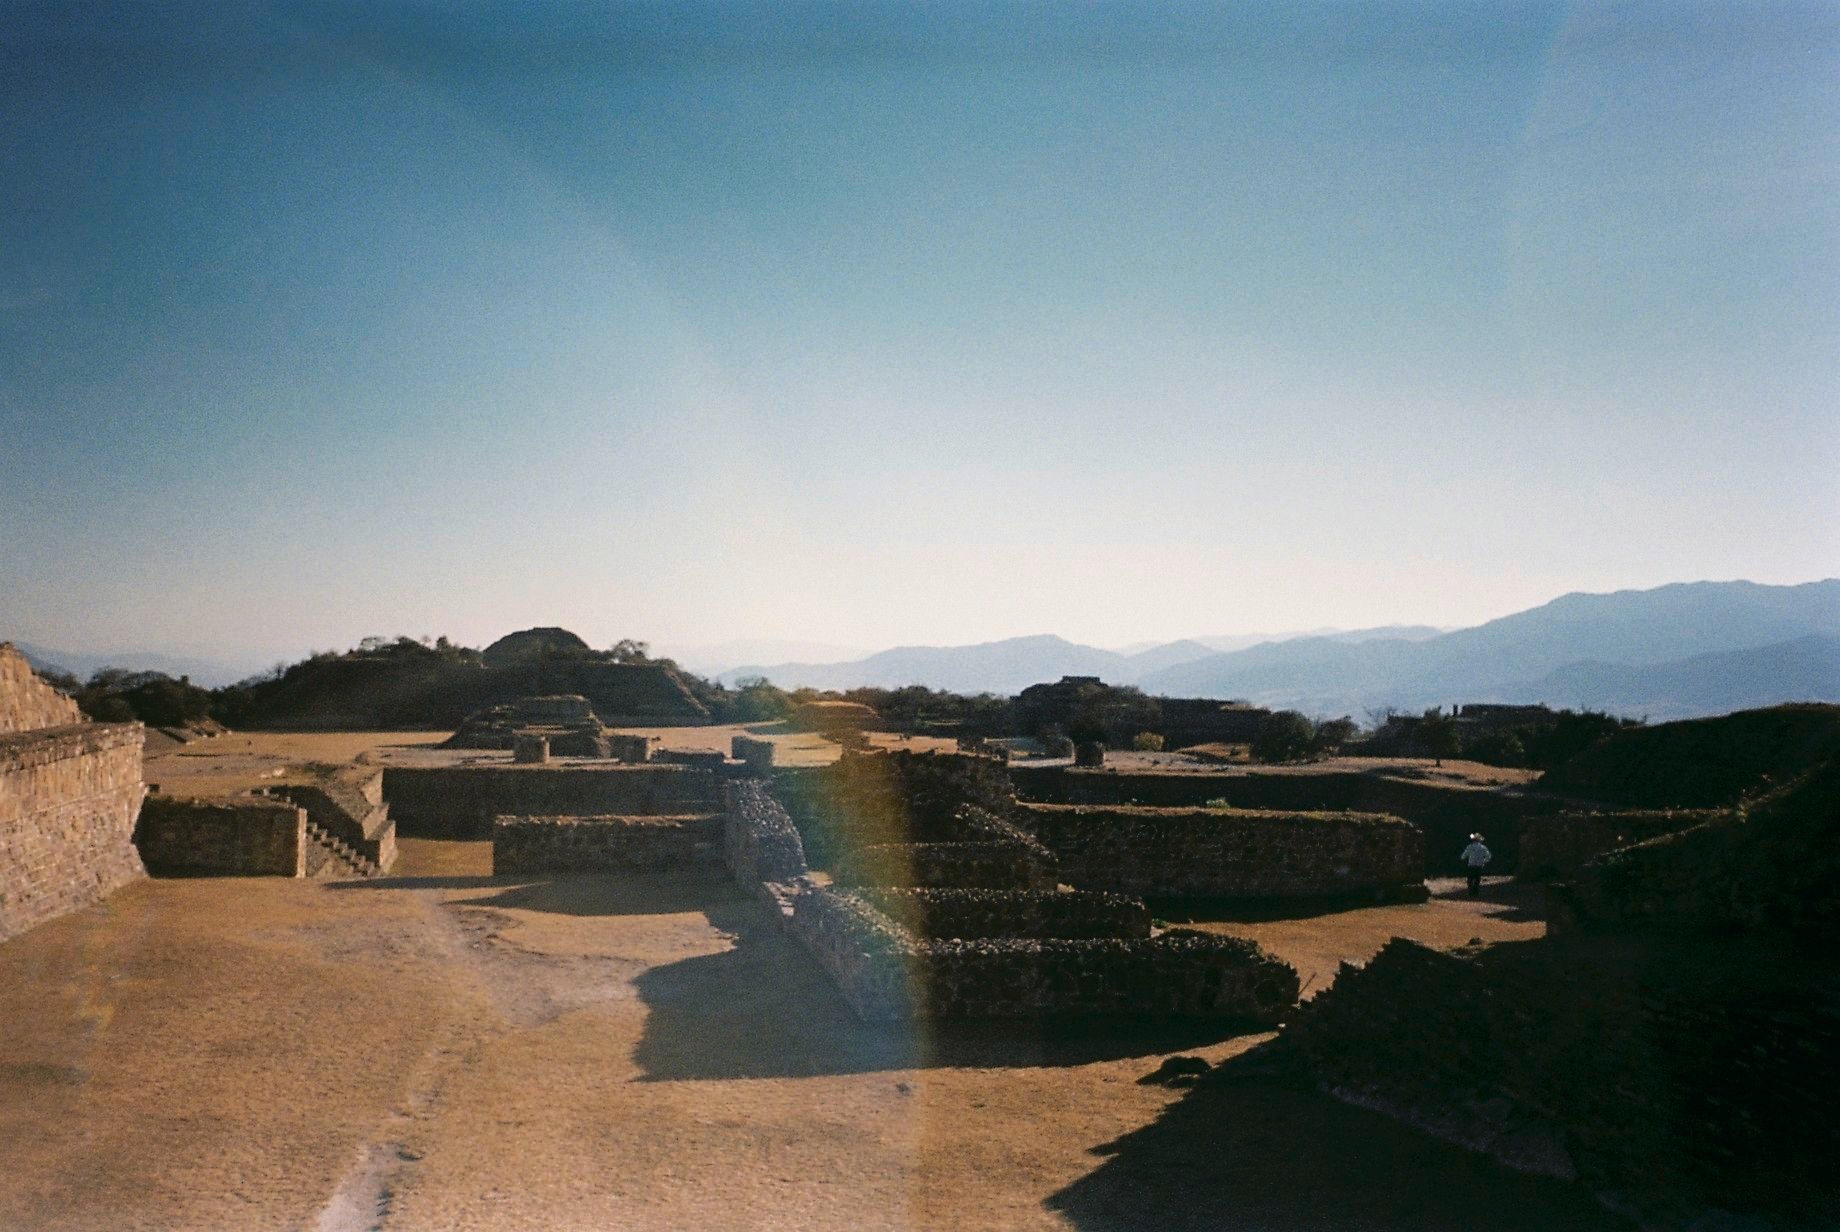 Monte Alban 01-2020 - 31 of 33